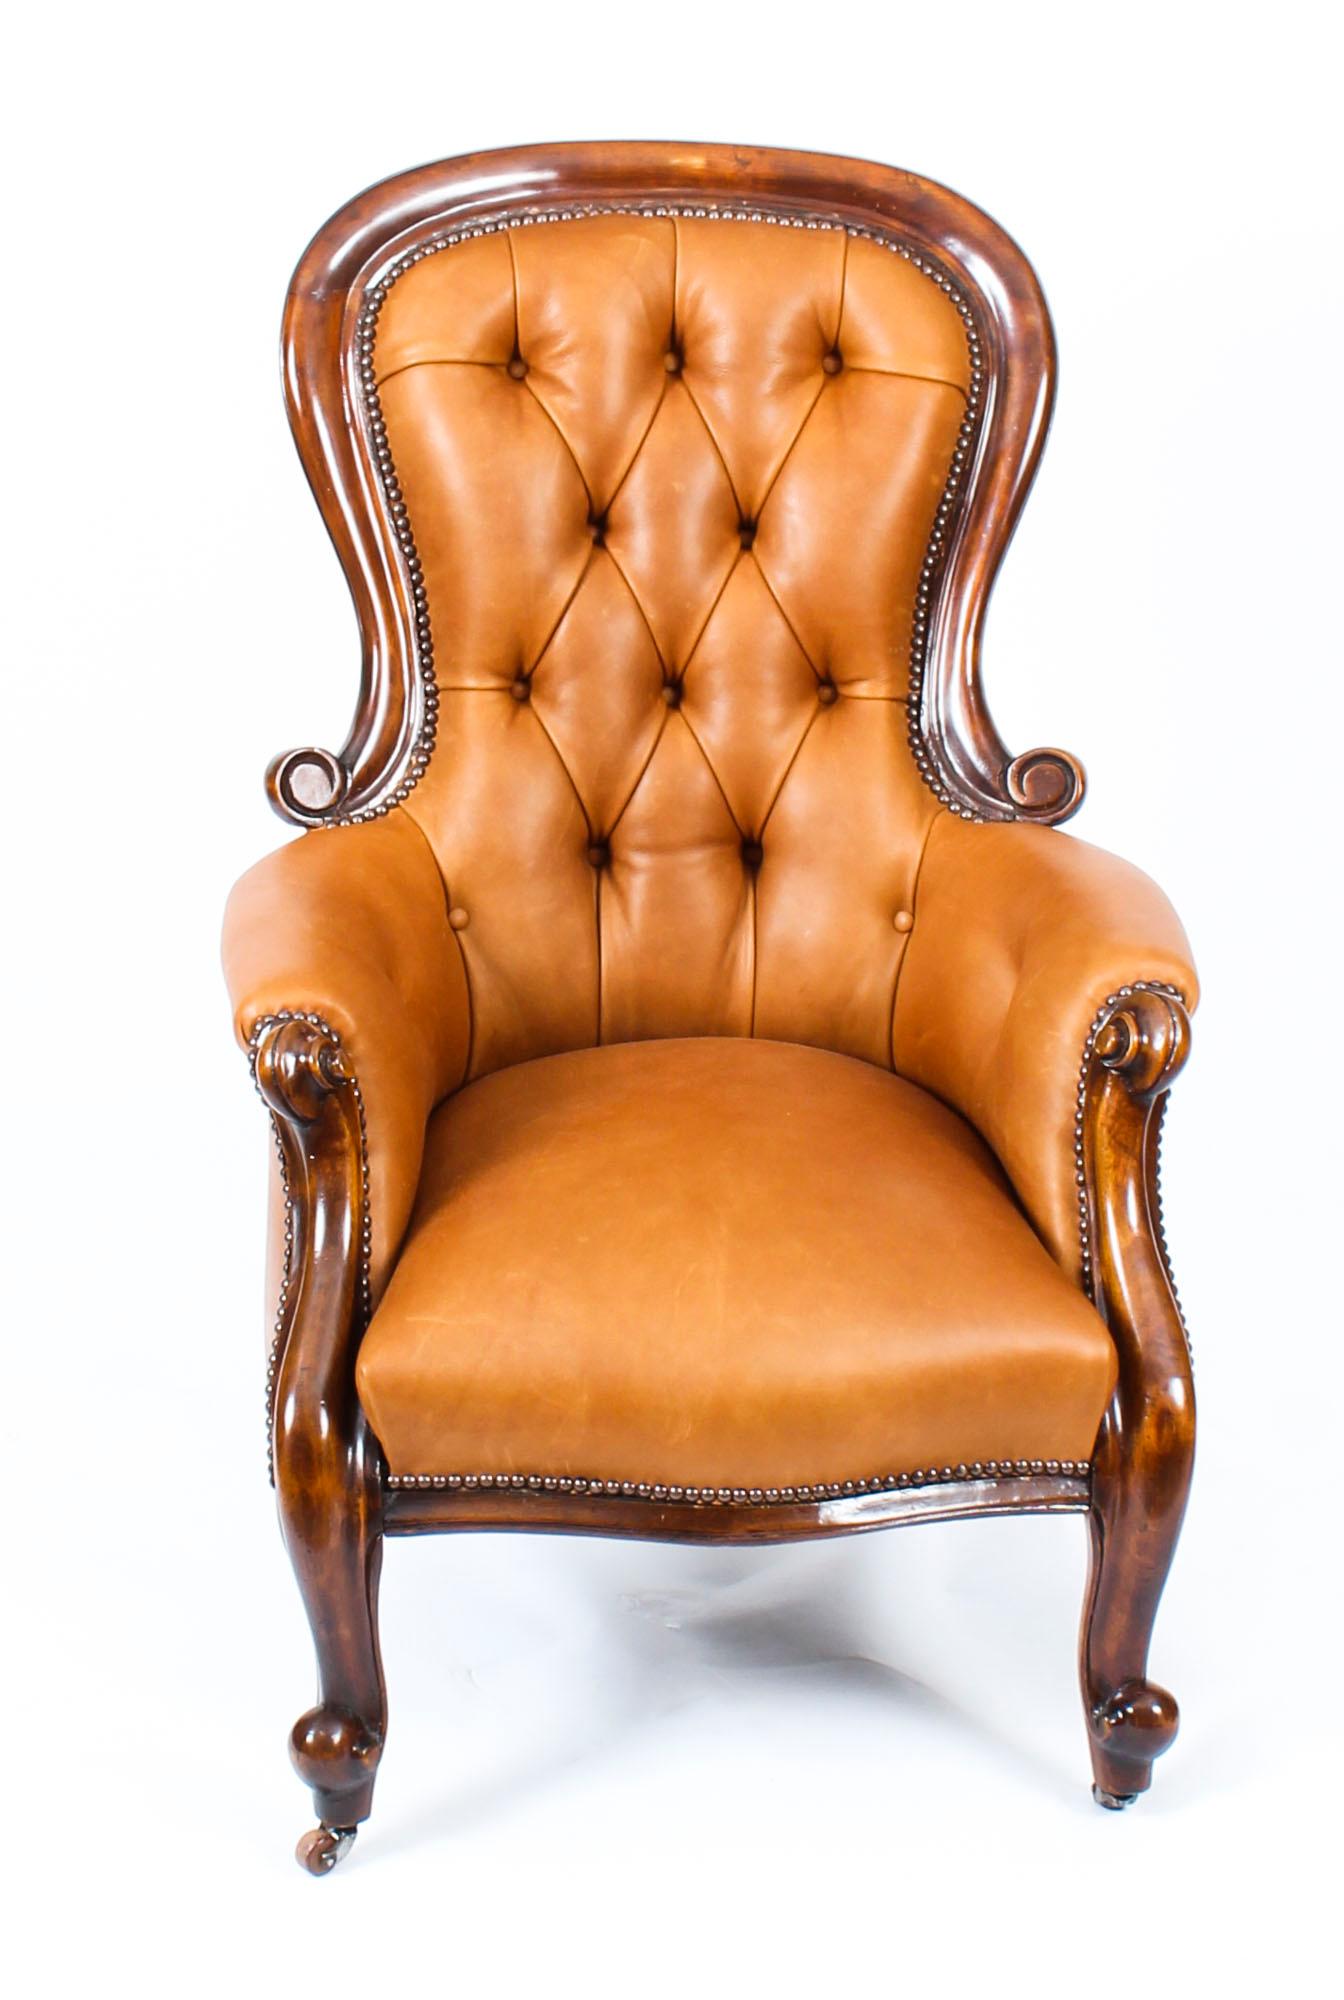 This is a handsome pair of antique Victorian mahogany and leather upholstered spoonback armchairs, circa 1870 in date.

This pair was made from hand carved solid mahogany, each with button backed leather upholstery in a beautiful tan color. They are